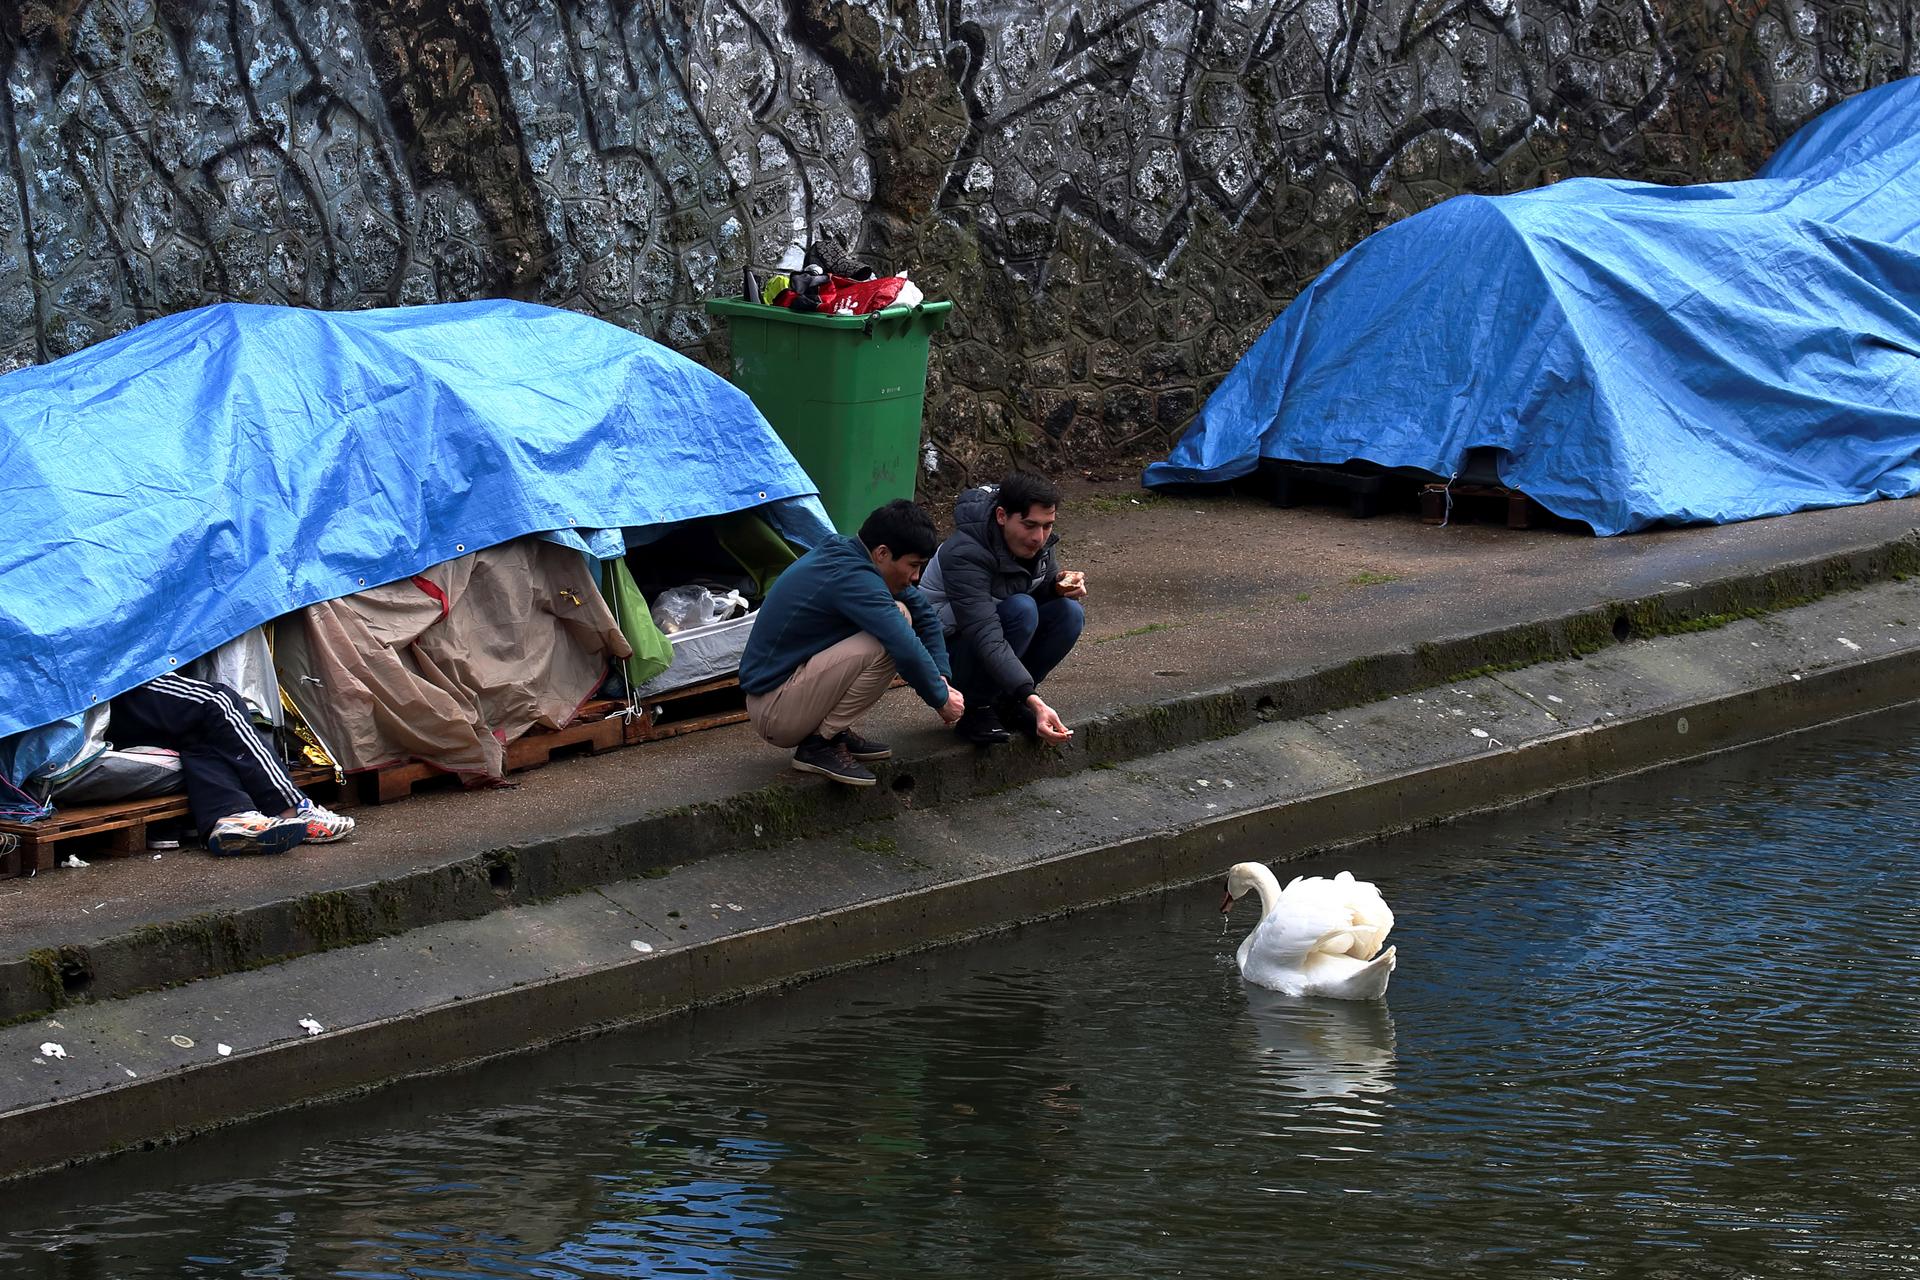 Two young men crouch by a canal feeding swans with camping tents in the background.